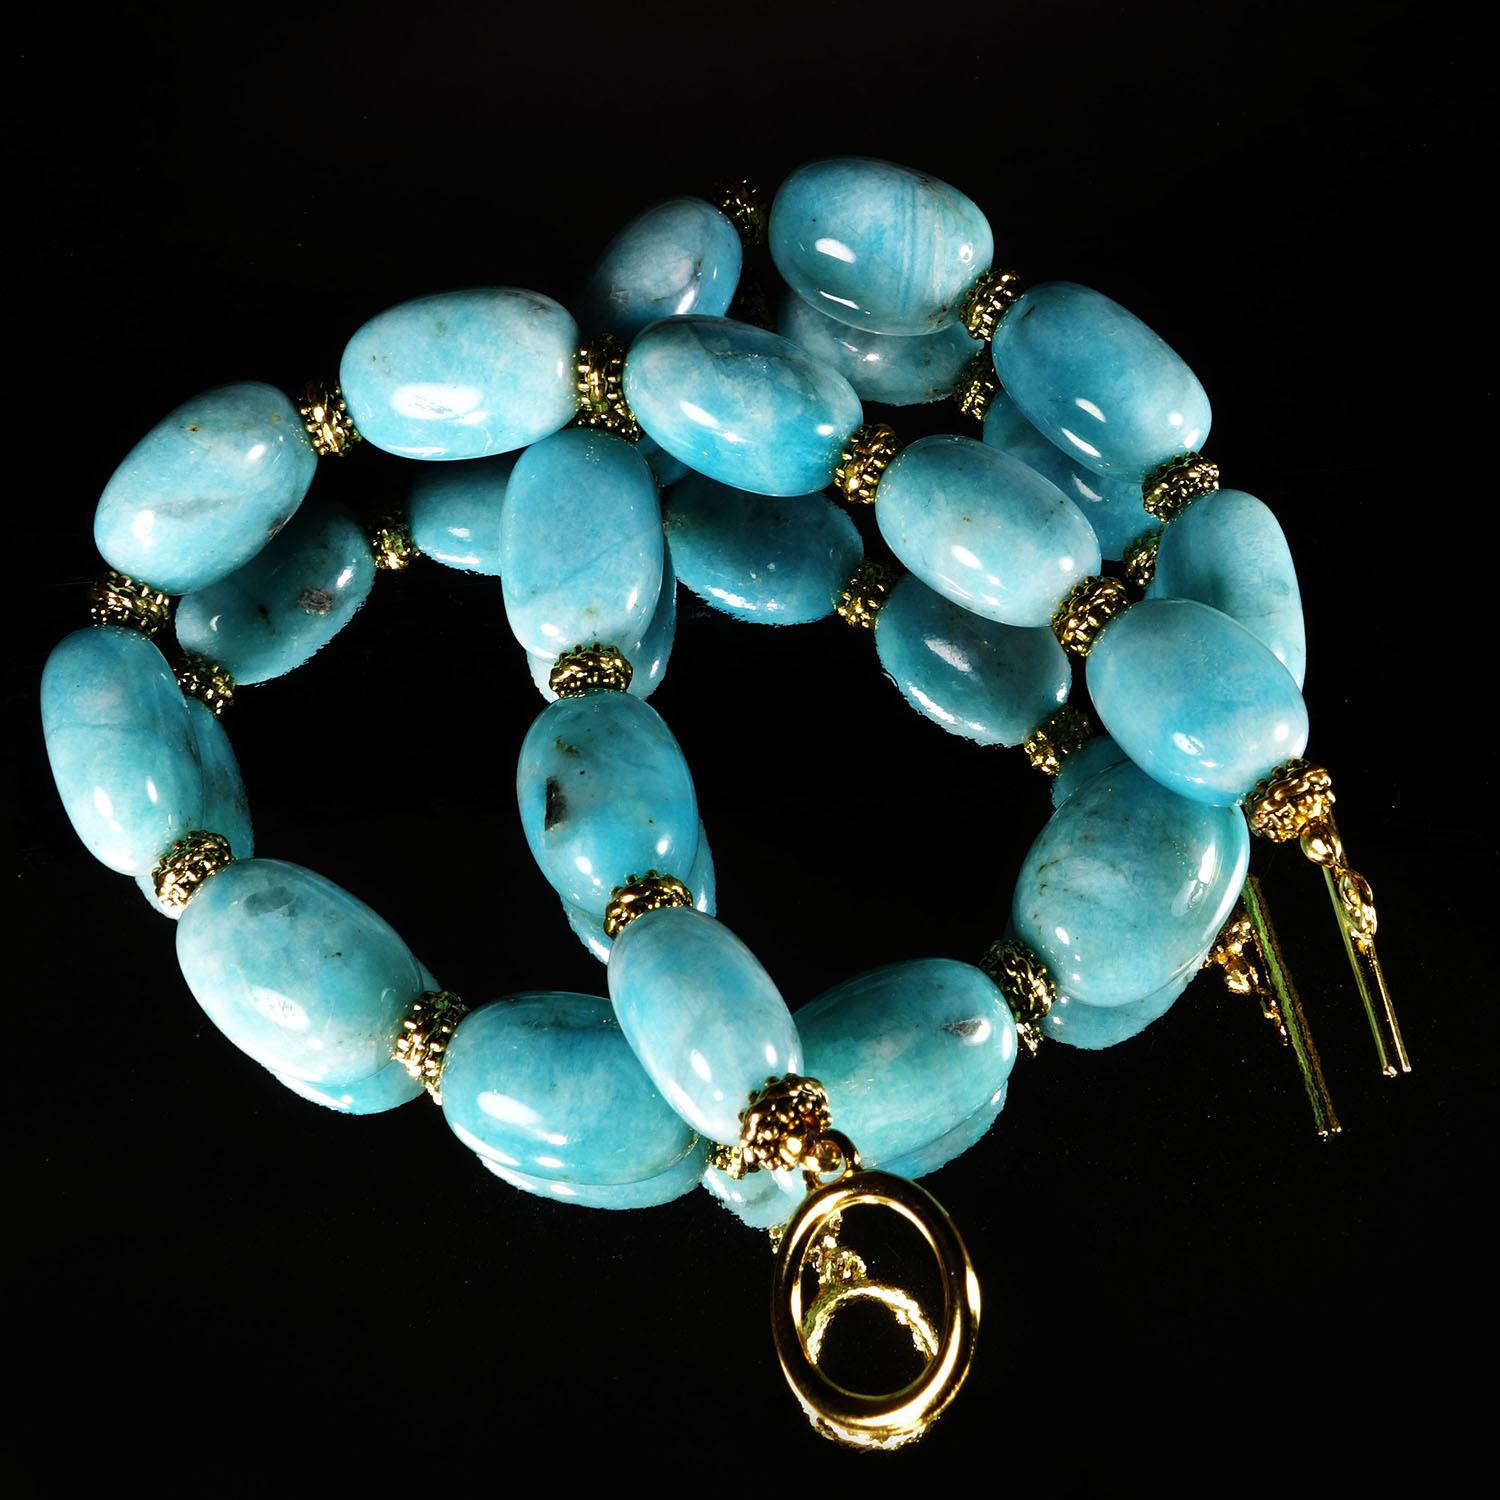 AJD 20 Inch Polished Amazonite Nugget Necklace with Bali Bead Accents 1